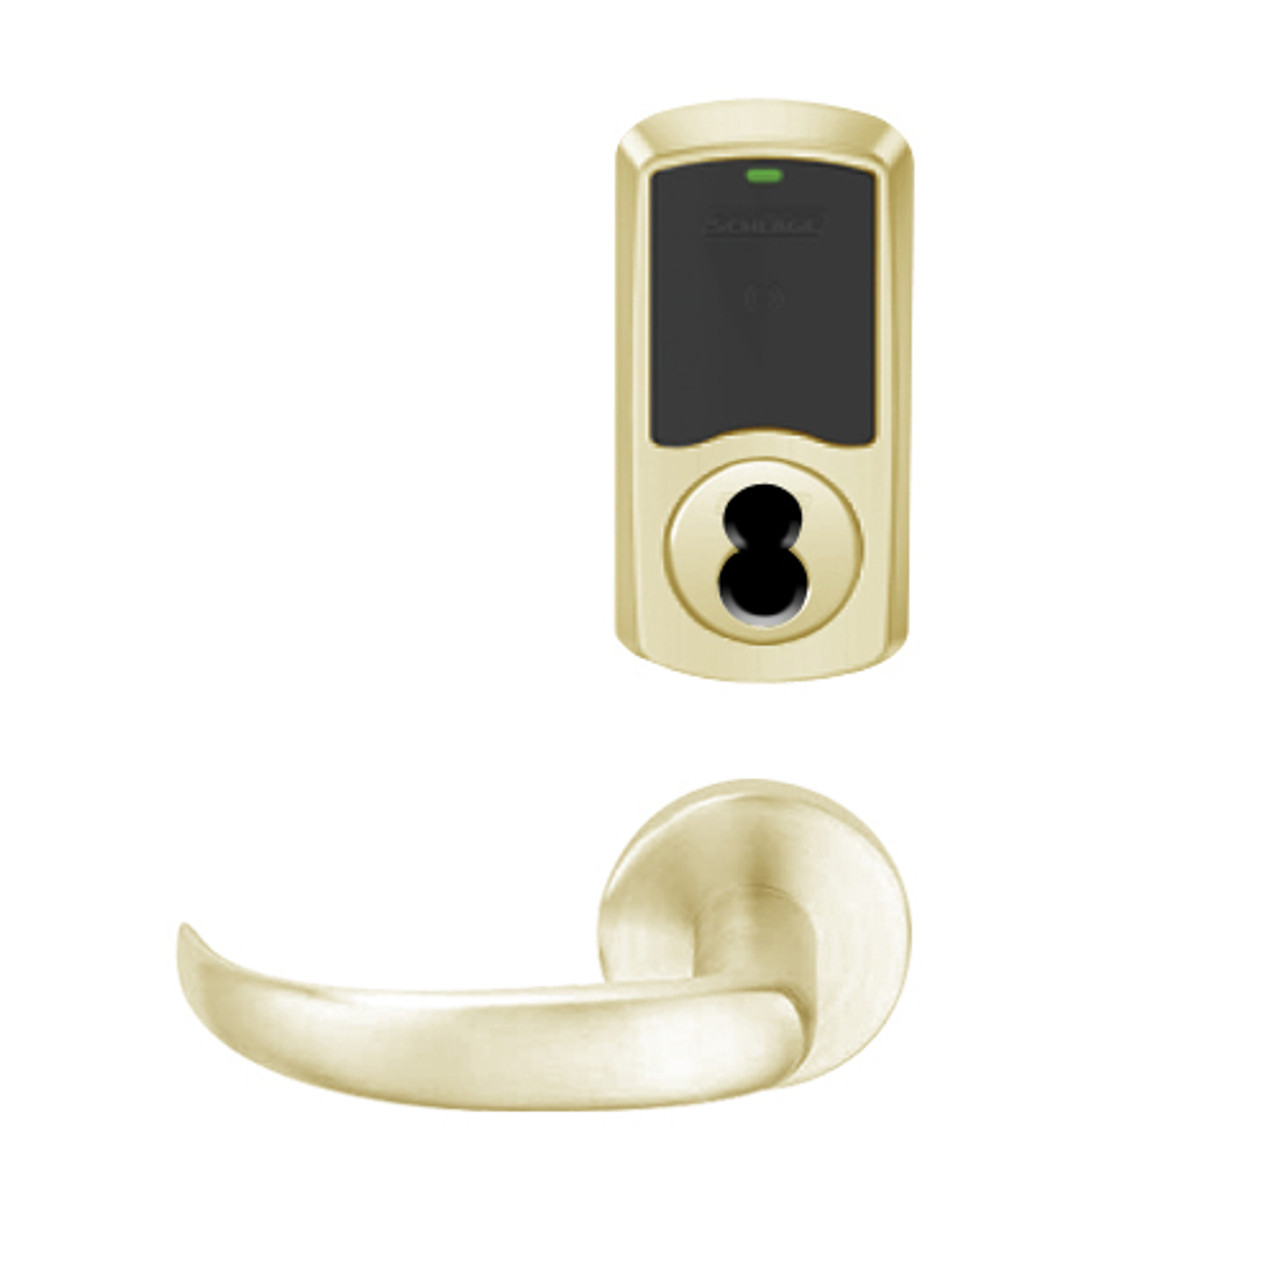 LEMD-GRW-BD-17-606-00C Schlage Privacy/Apartment Wireless Greenwich Mortise Deadbolt Lock with LED and Sparta Lever Prepped for SFIC in Satin Brass